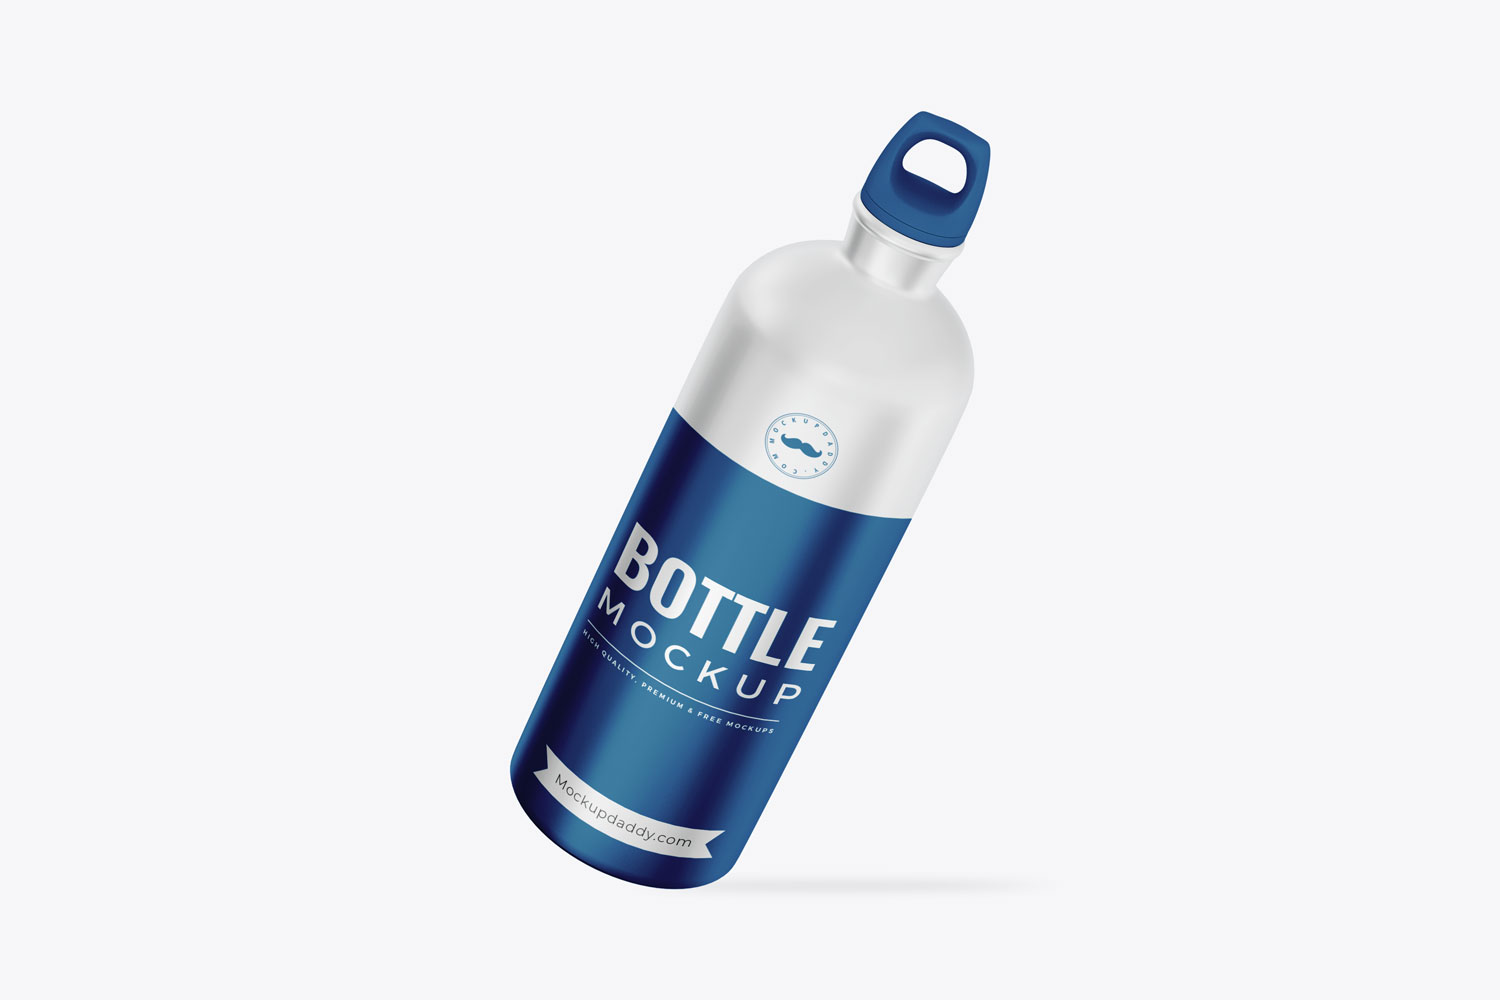 Floating Aluminium Bottle Mockup in blue and white color with blue cap.